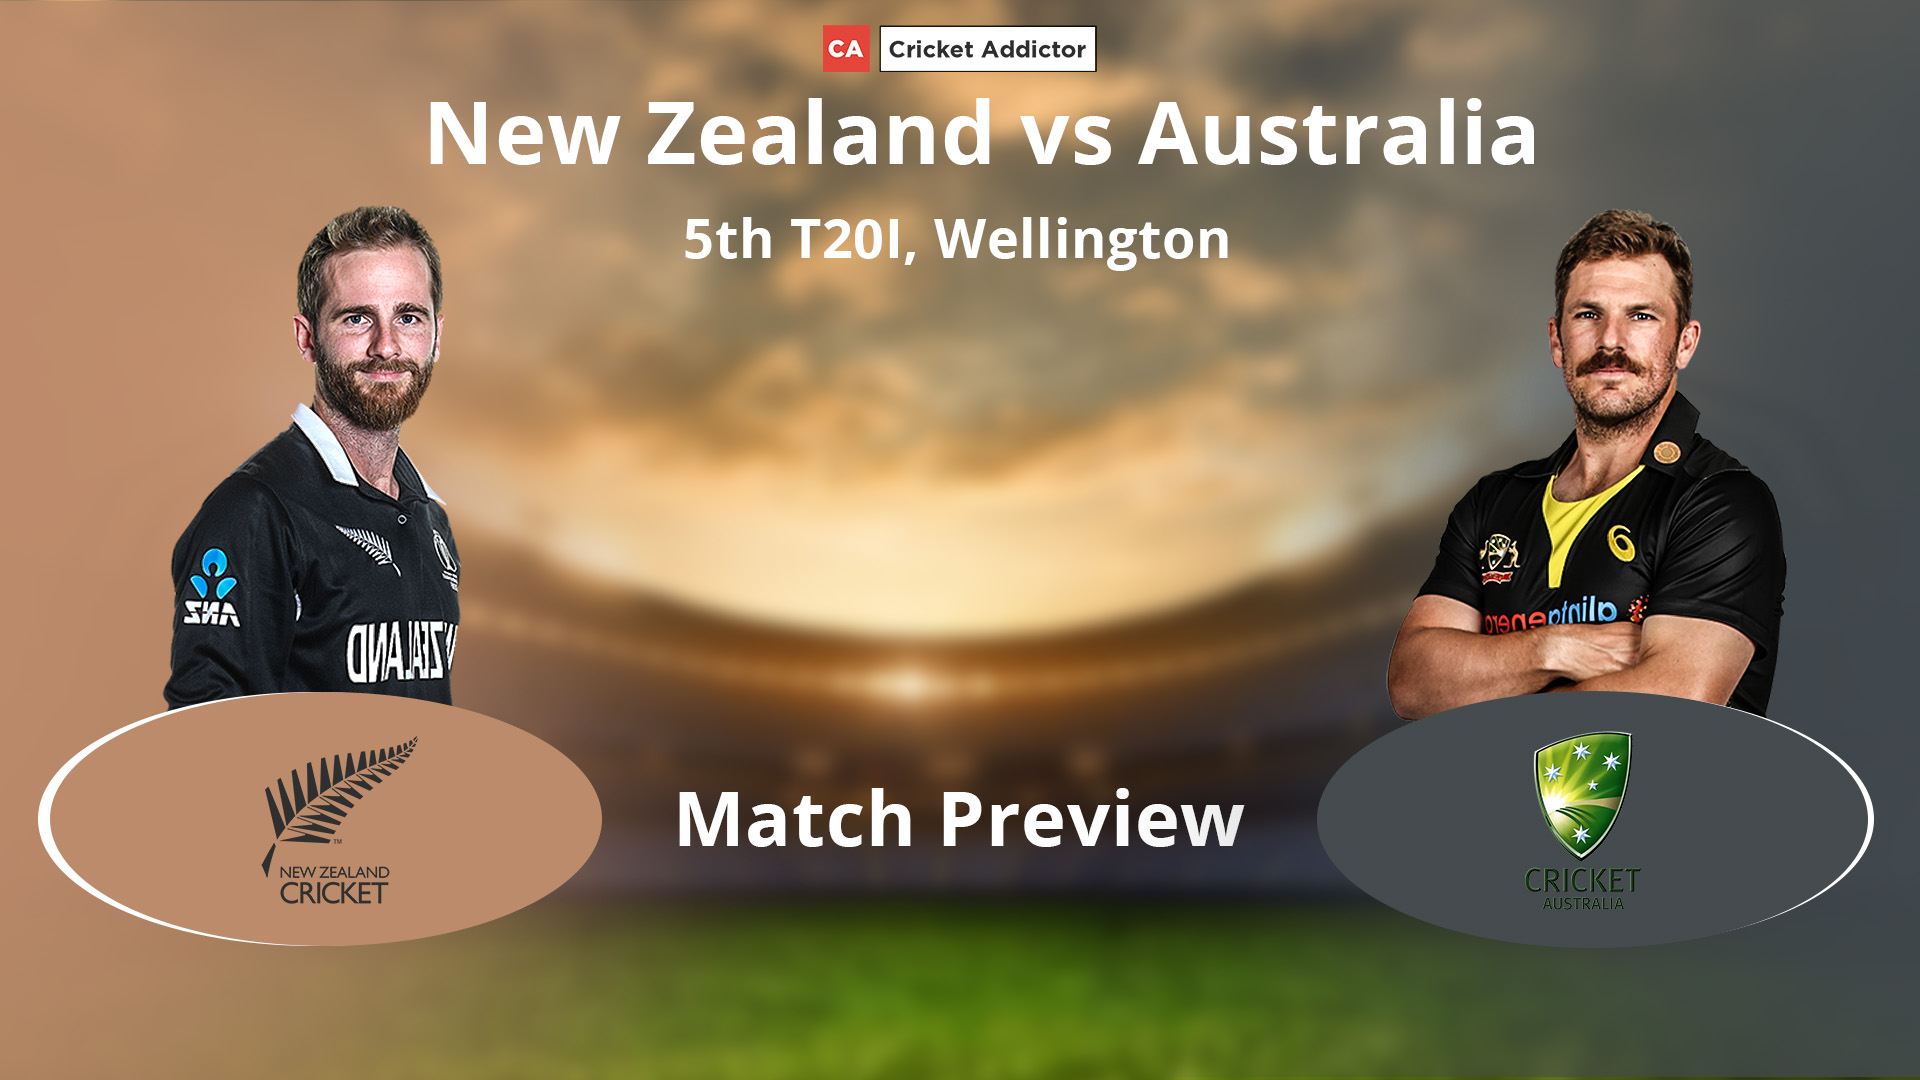 New Zealand vs Australia 2021, 5th T20I: Match Preview And Prediction